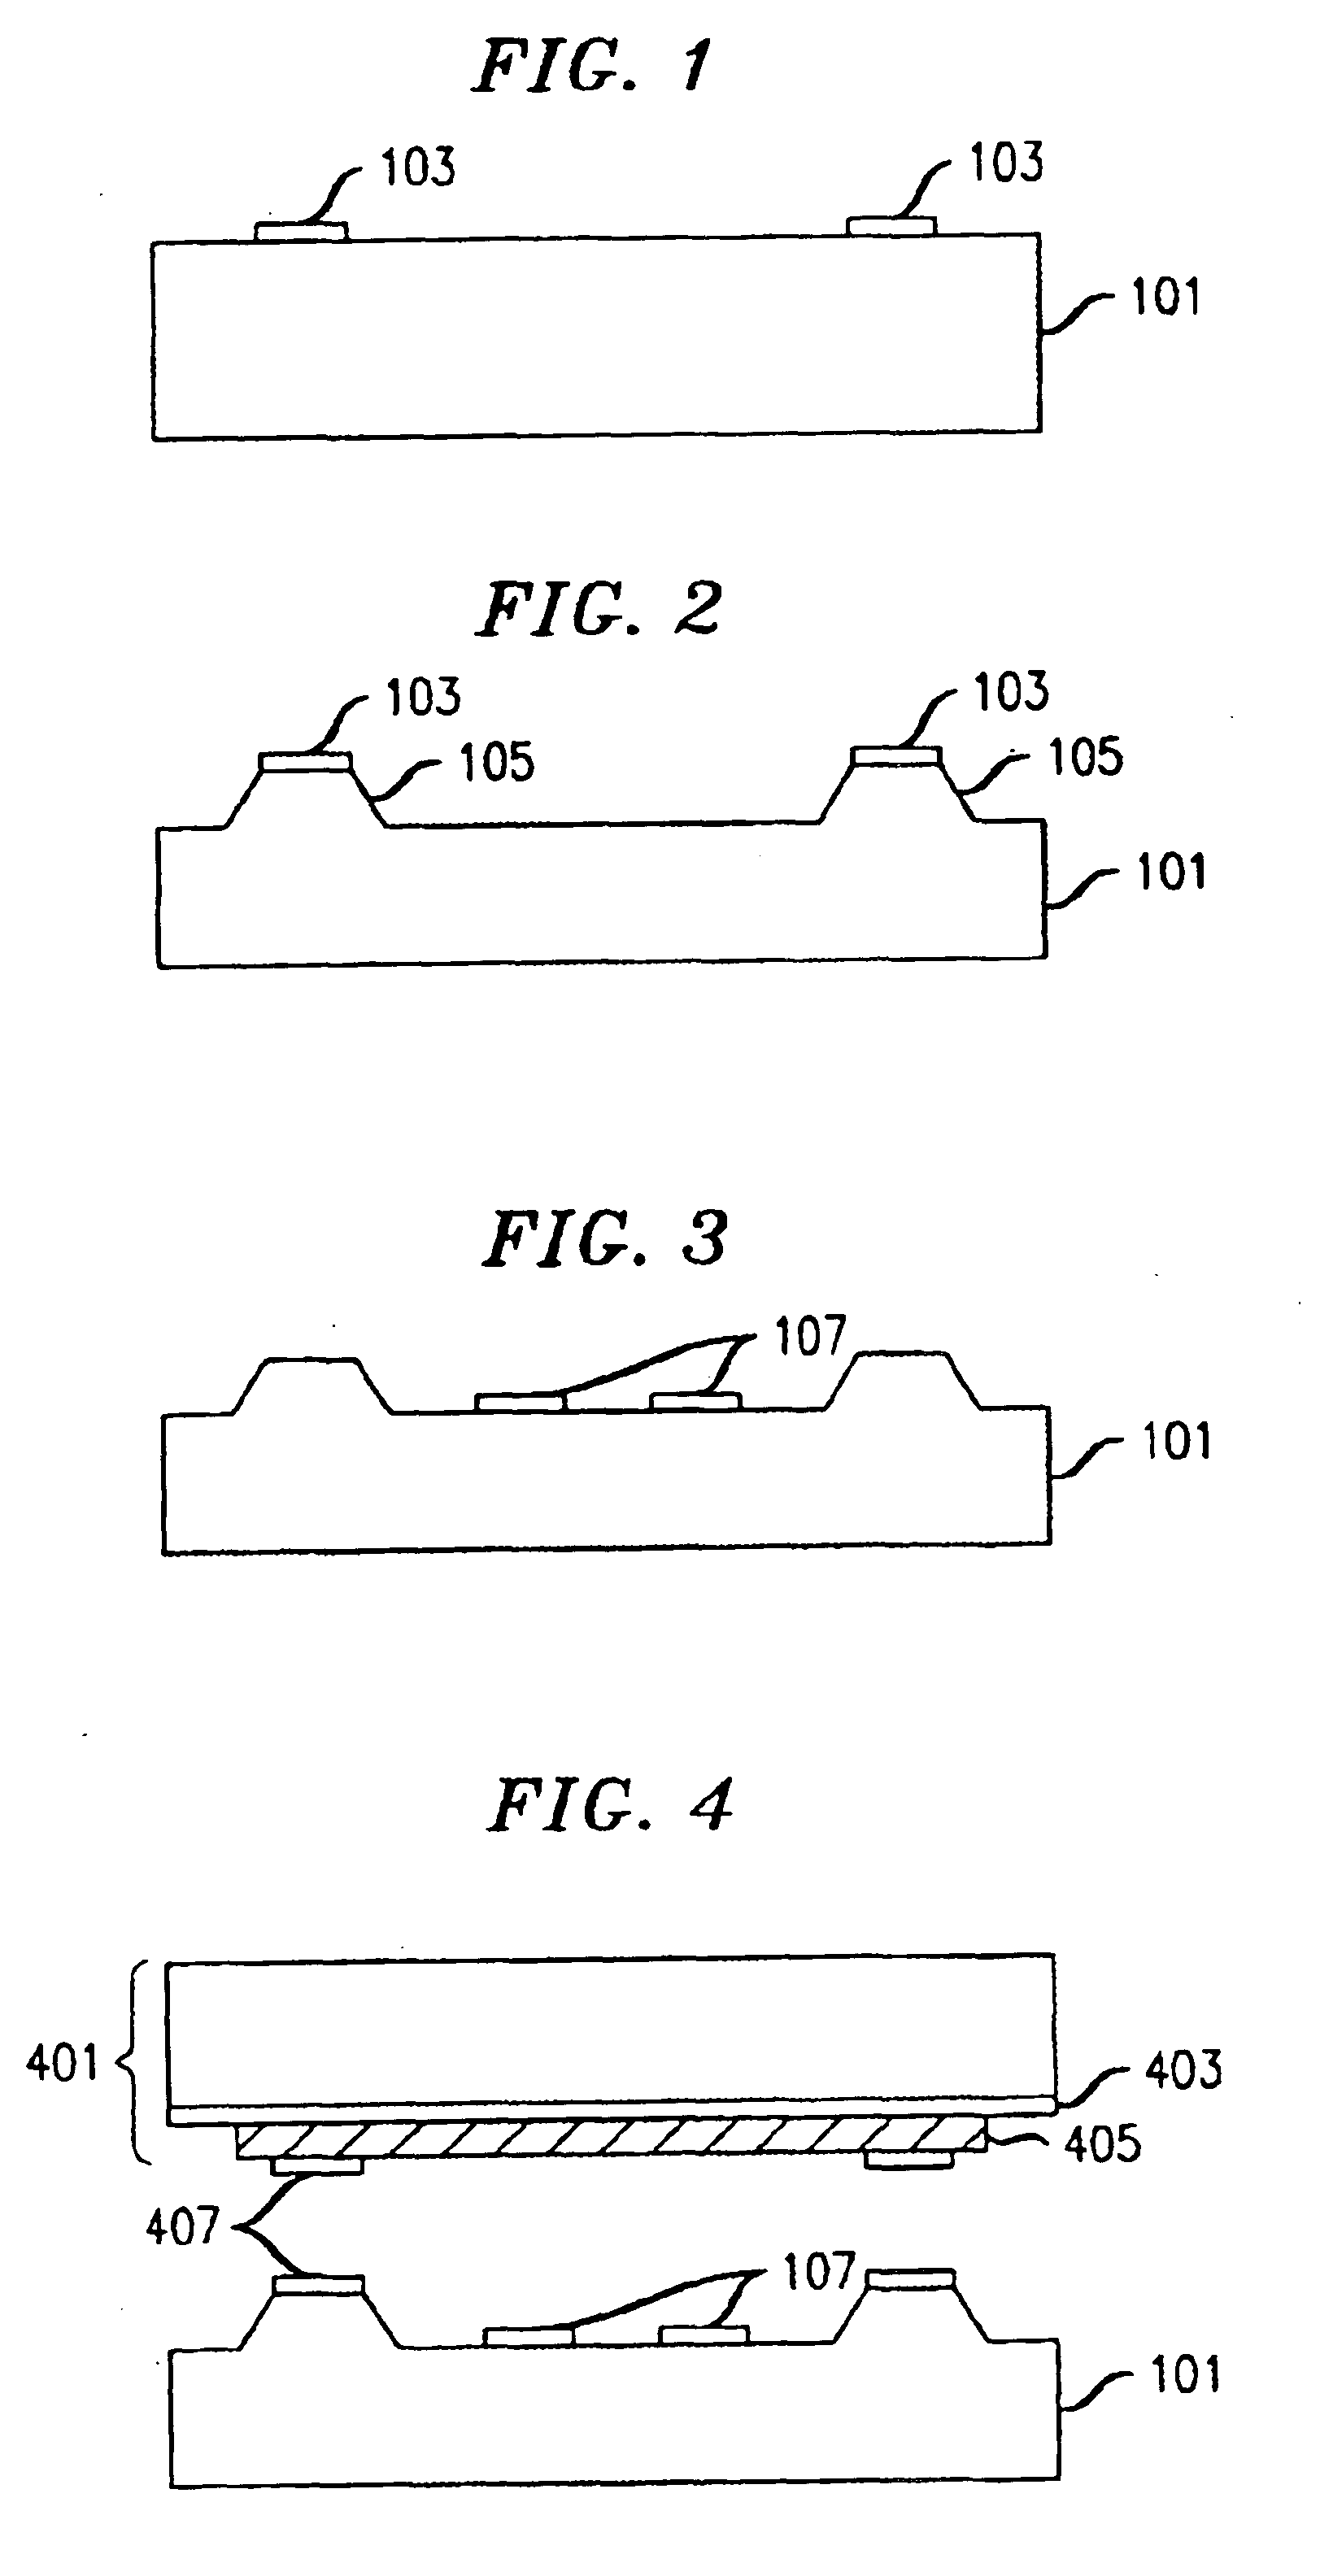 Optical micro-electromechanical systems (MEMS) devices and methods of making same